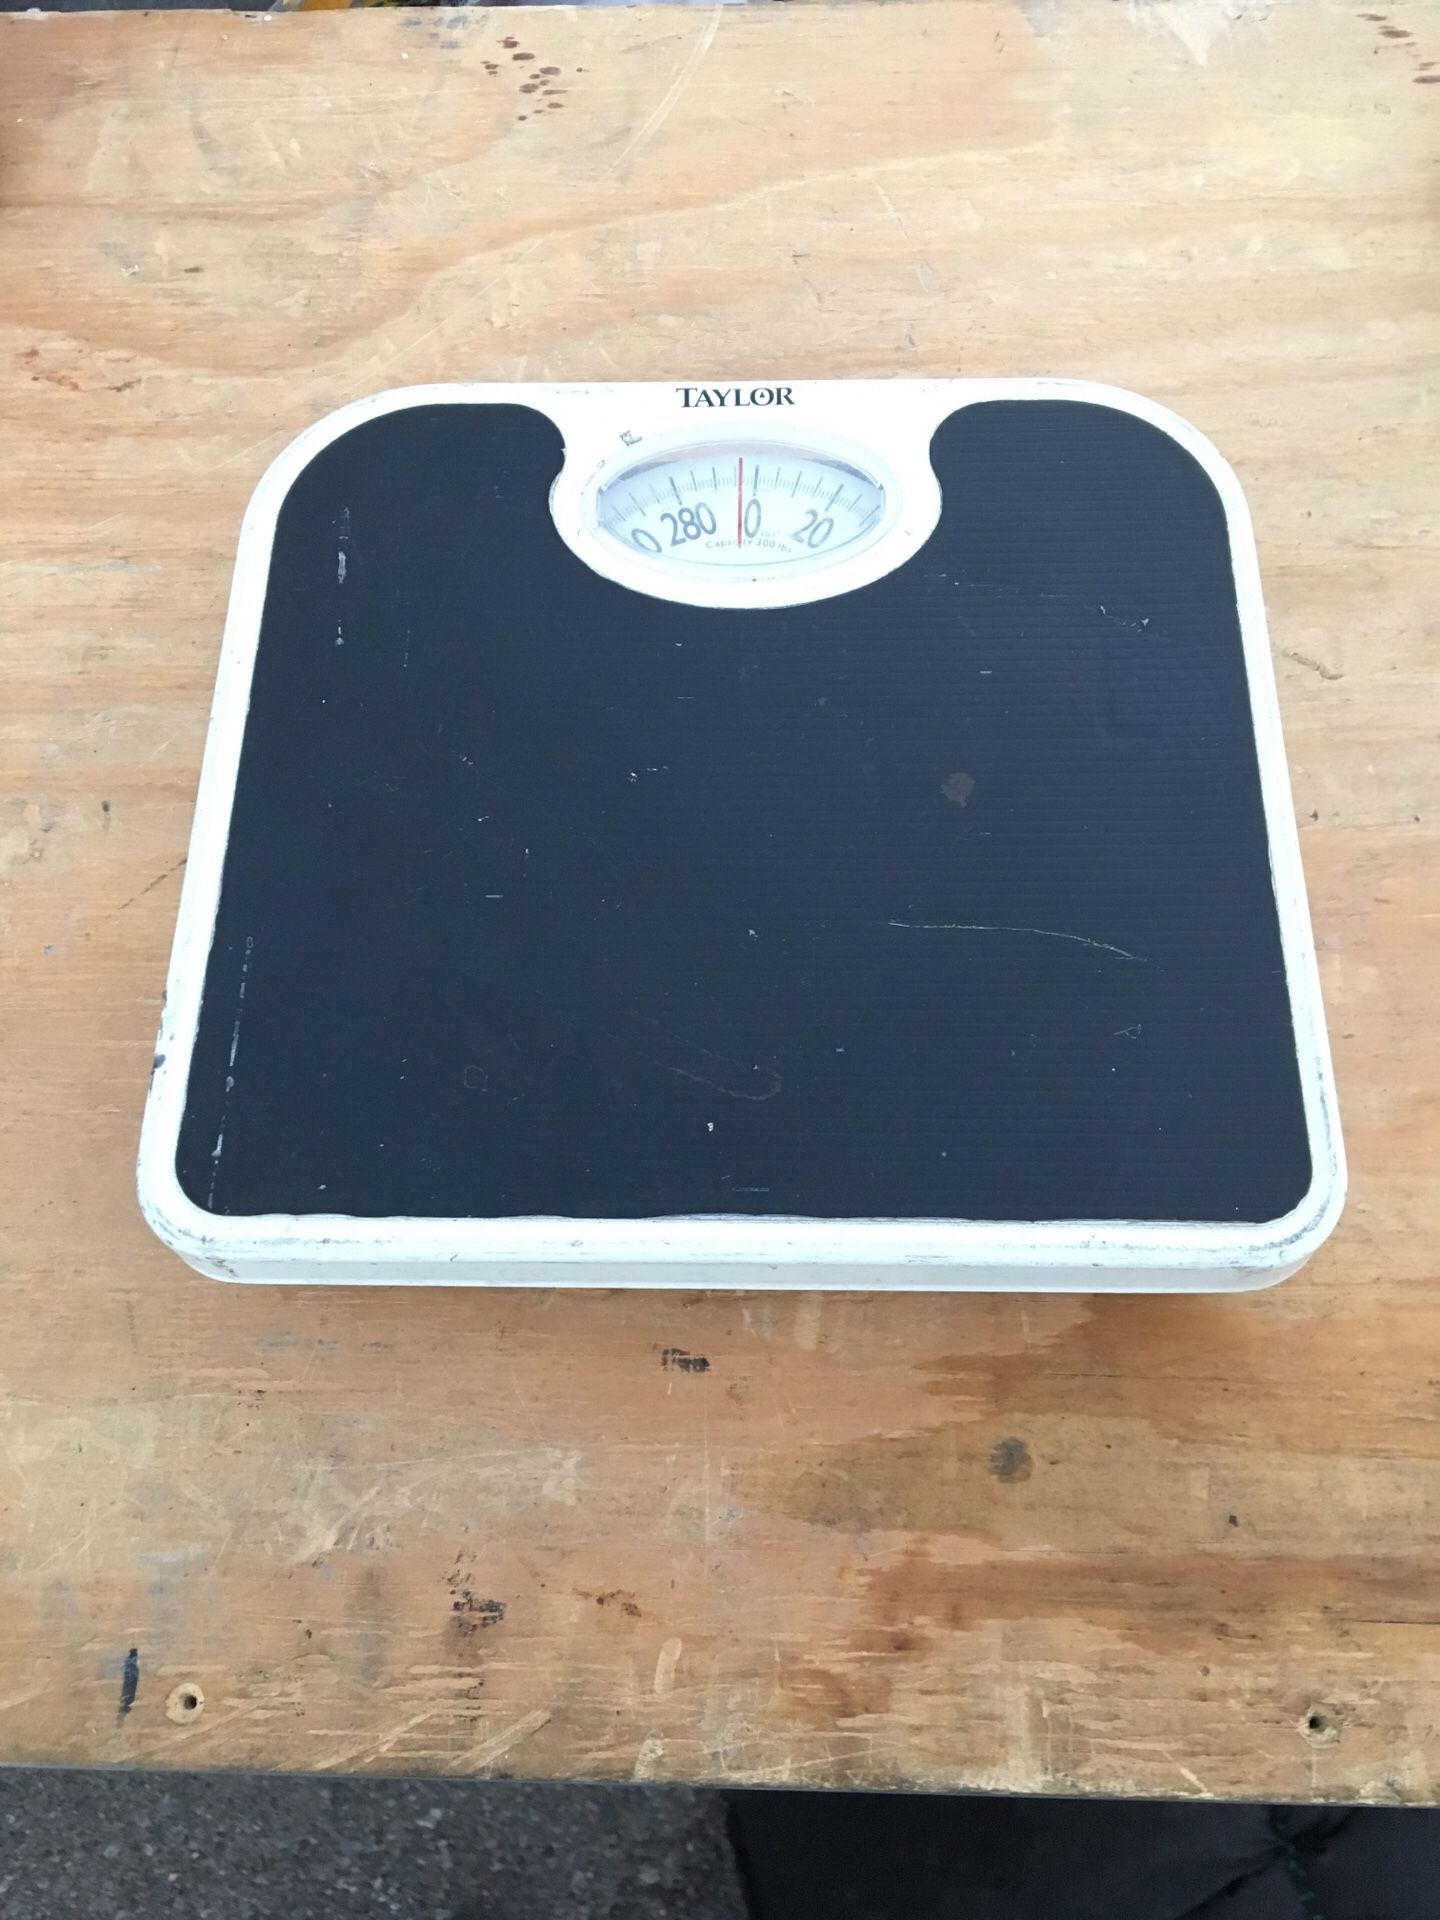 Taylor brand bathroom scale capacity 300 pounds. Works fine.